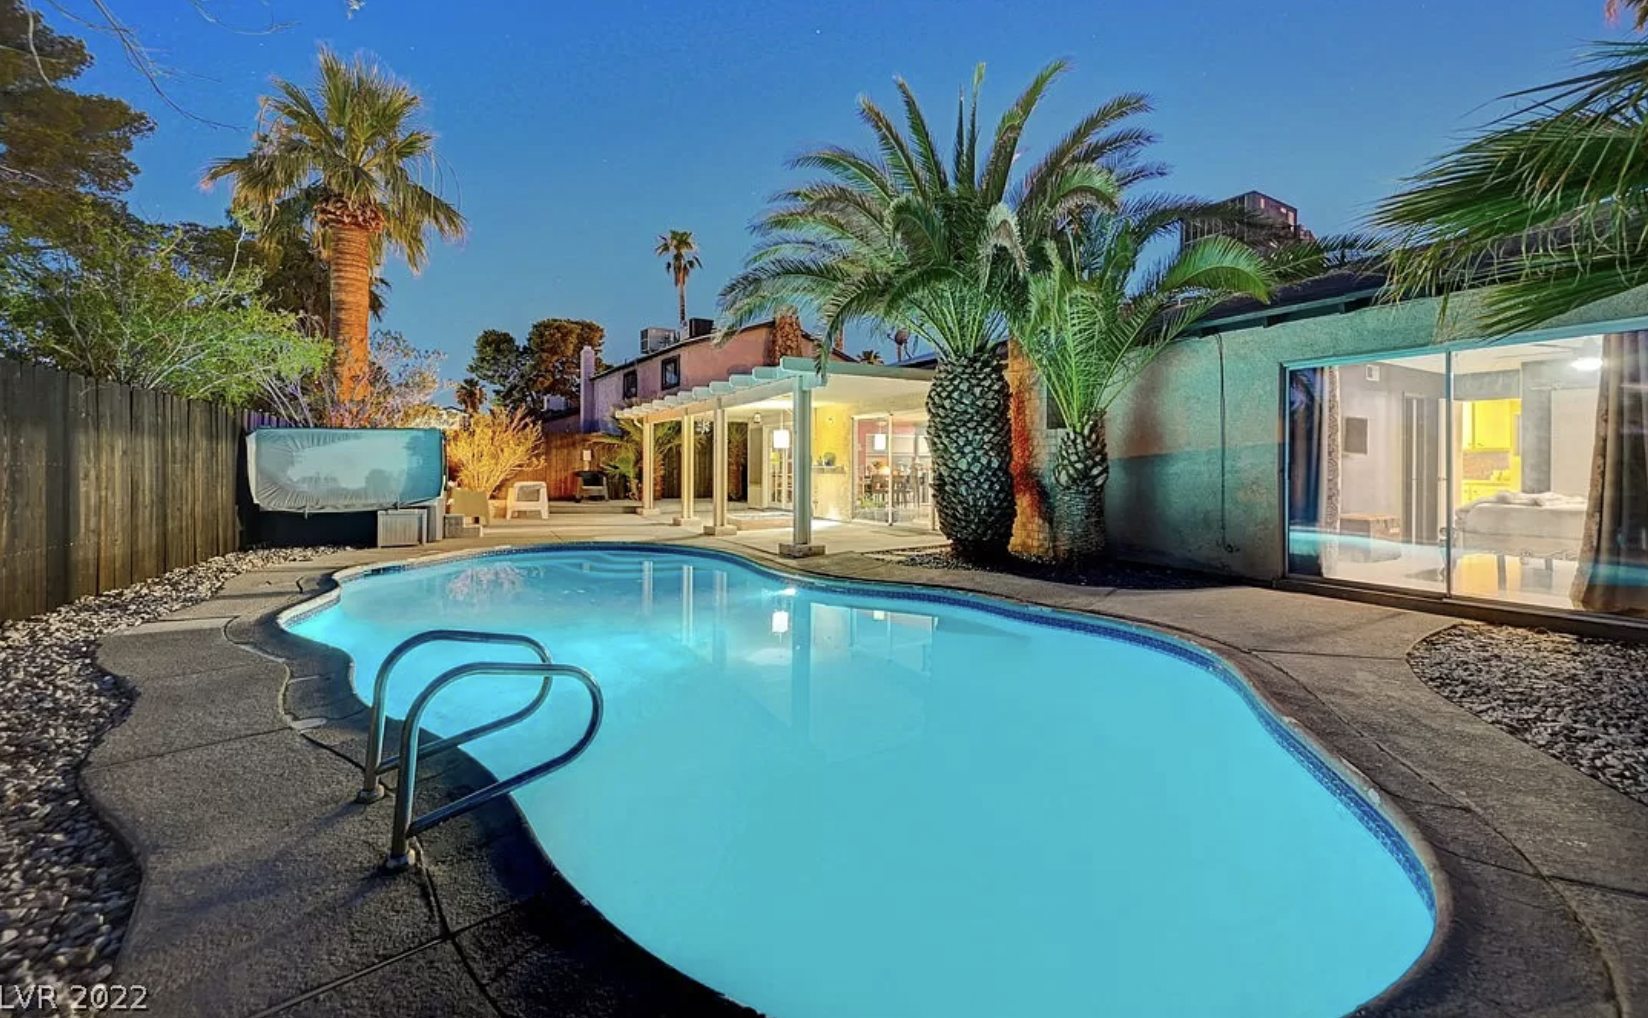 A colorful back yard with a bright blue pool, palm trees, covered patio, and large glass doors